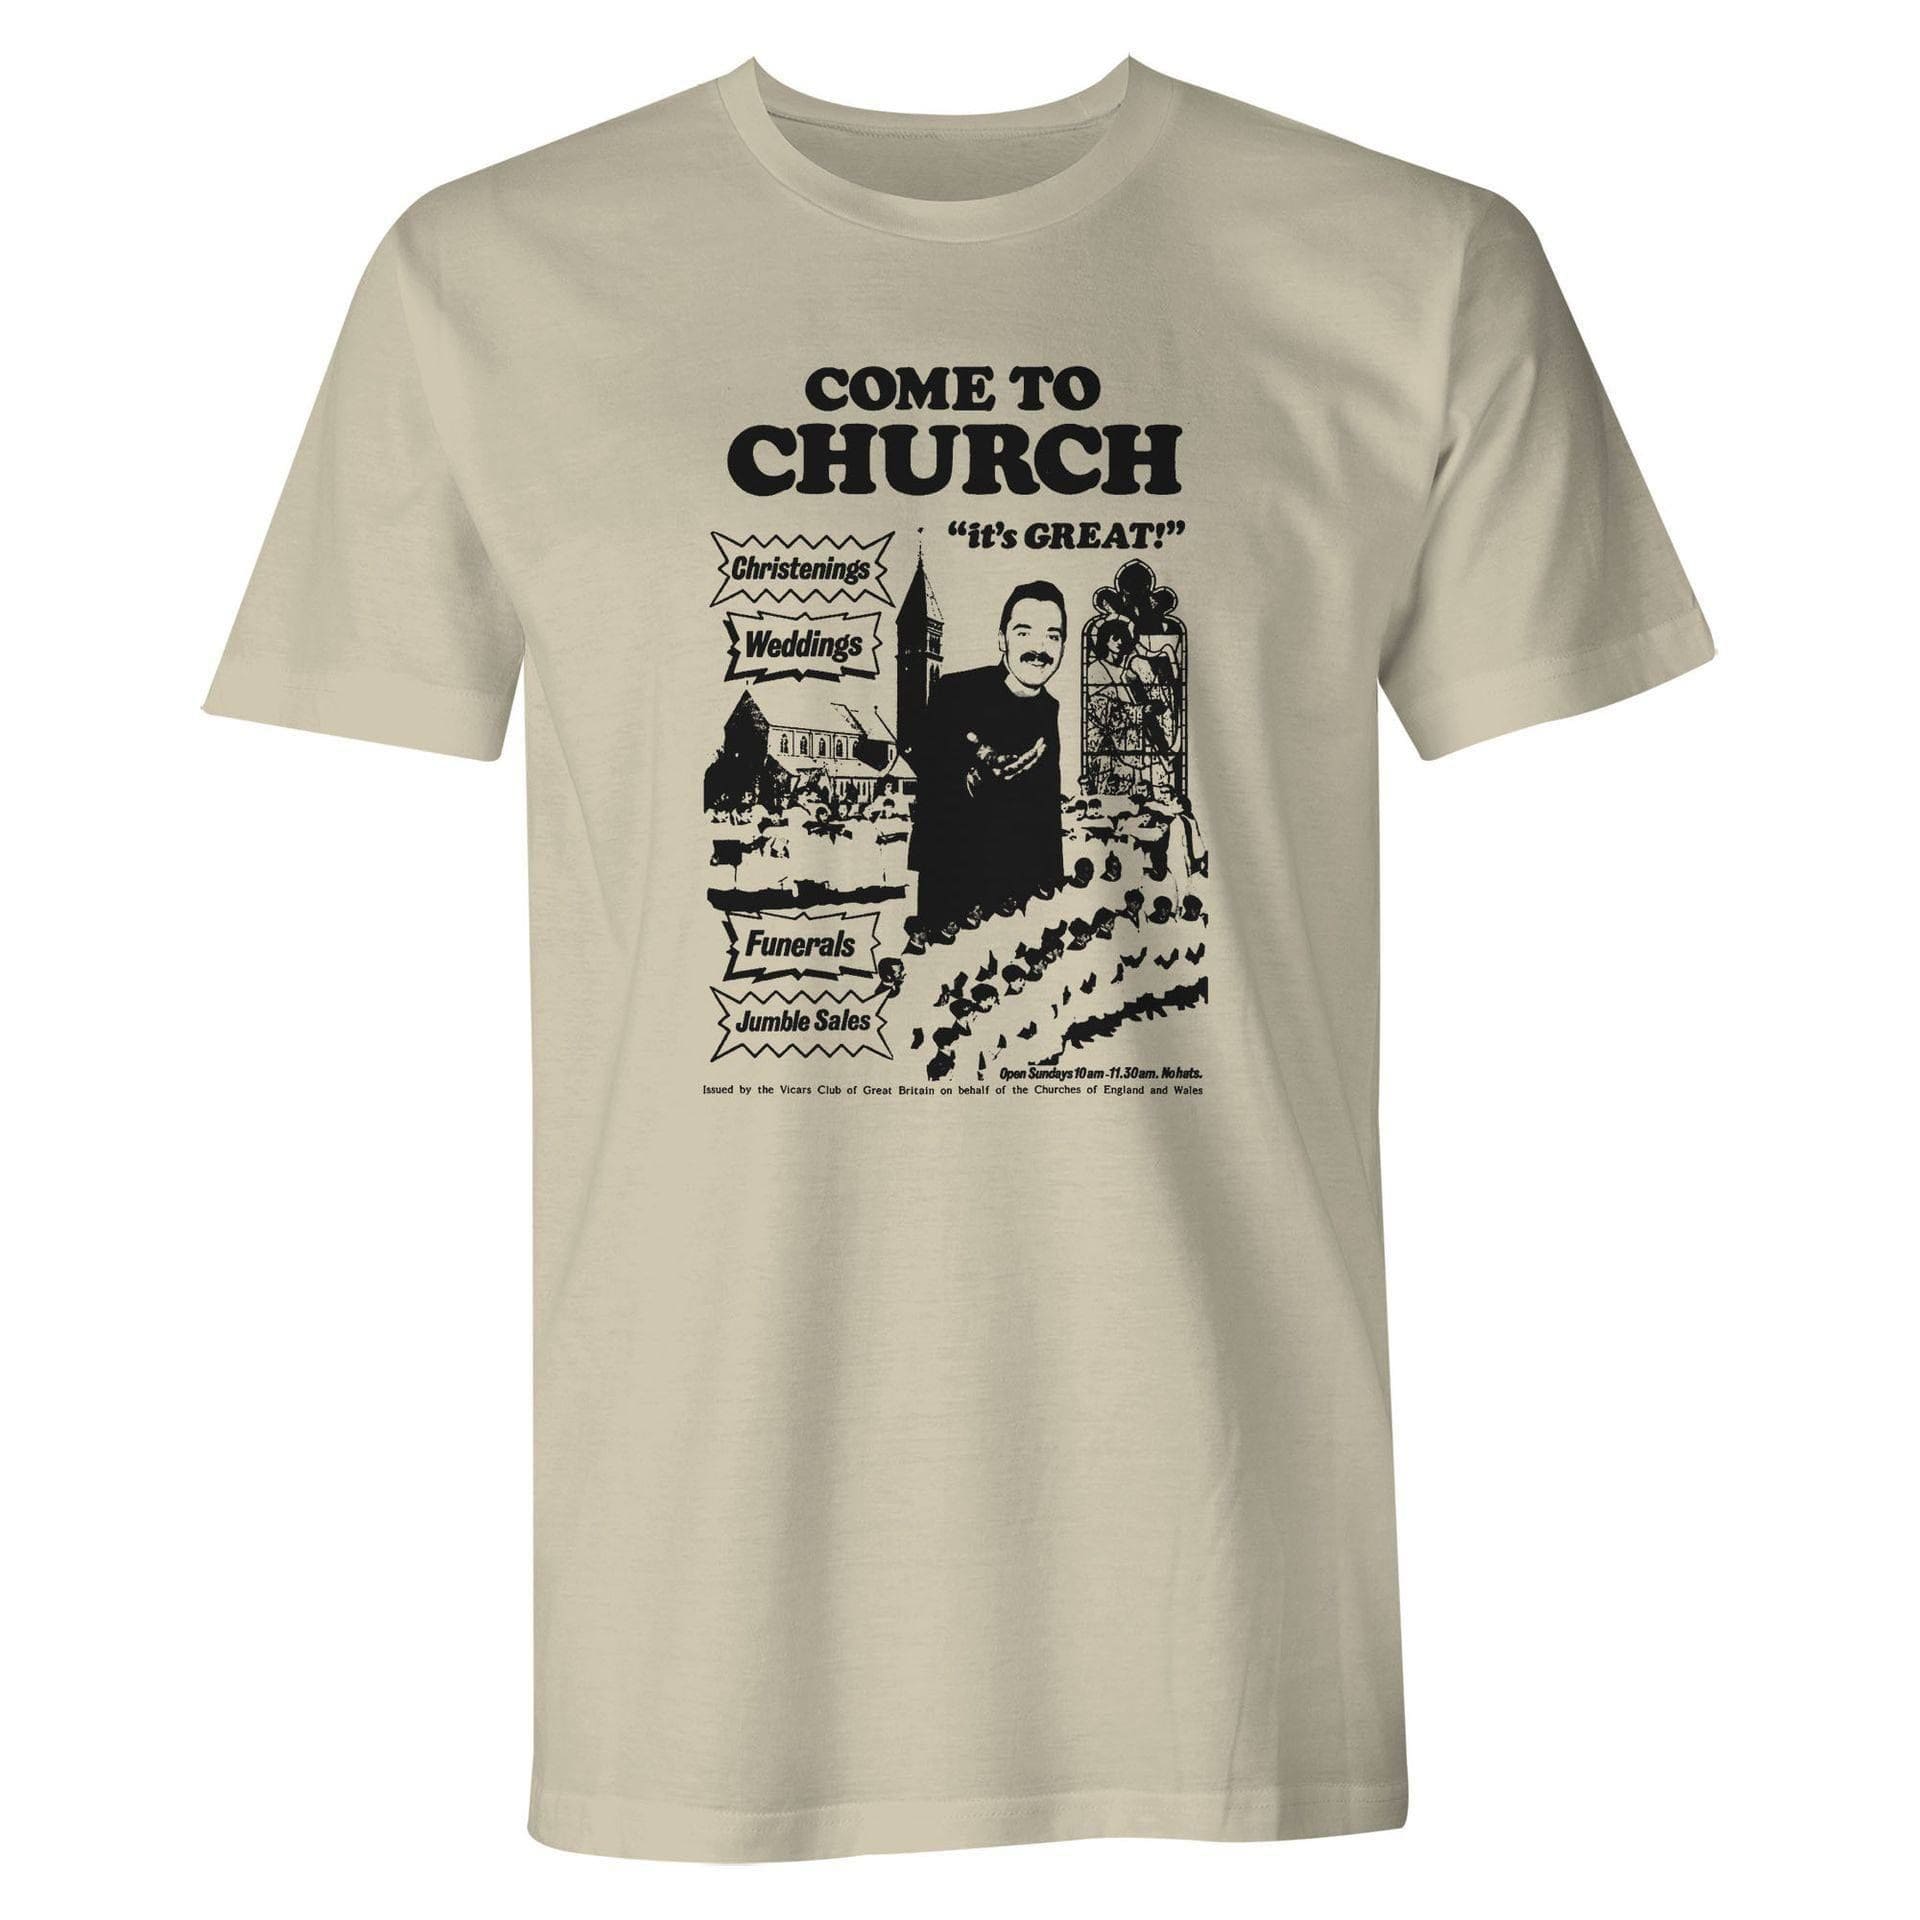 Come to church - Christenings and weddings, funerals and jumble sales